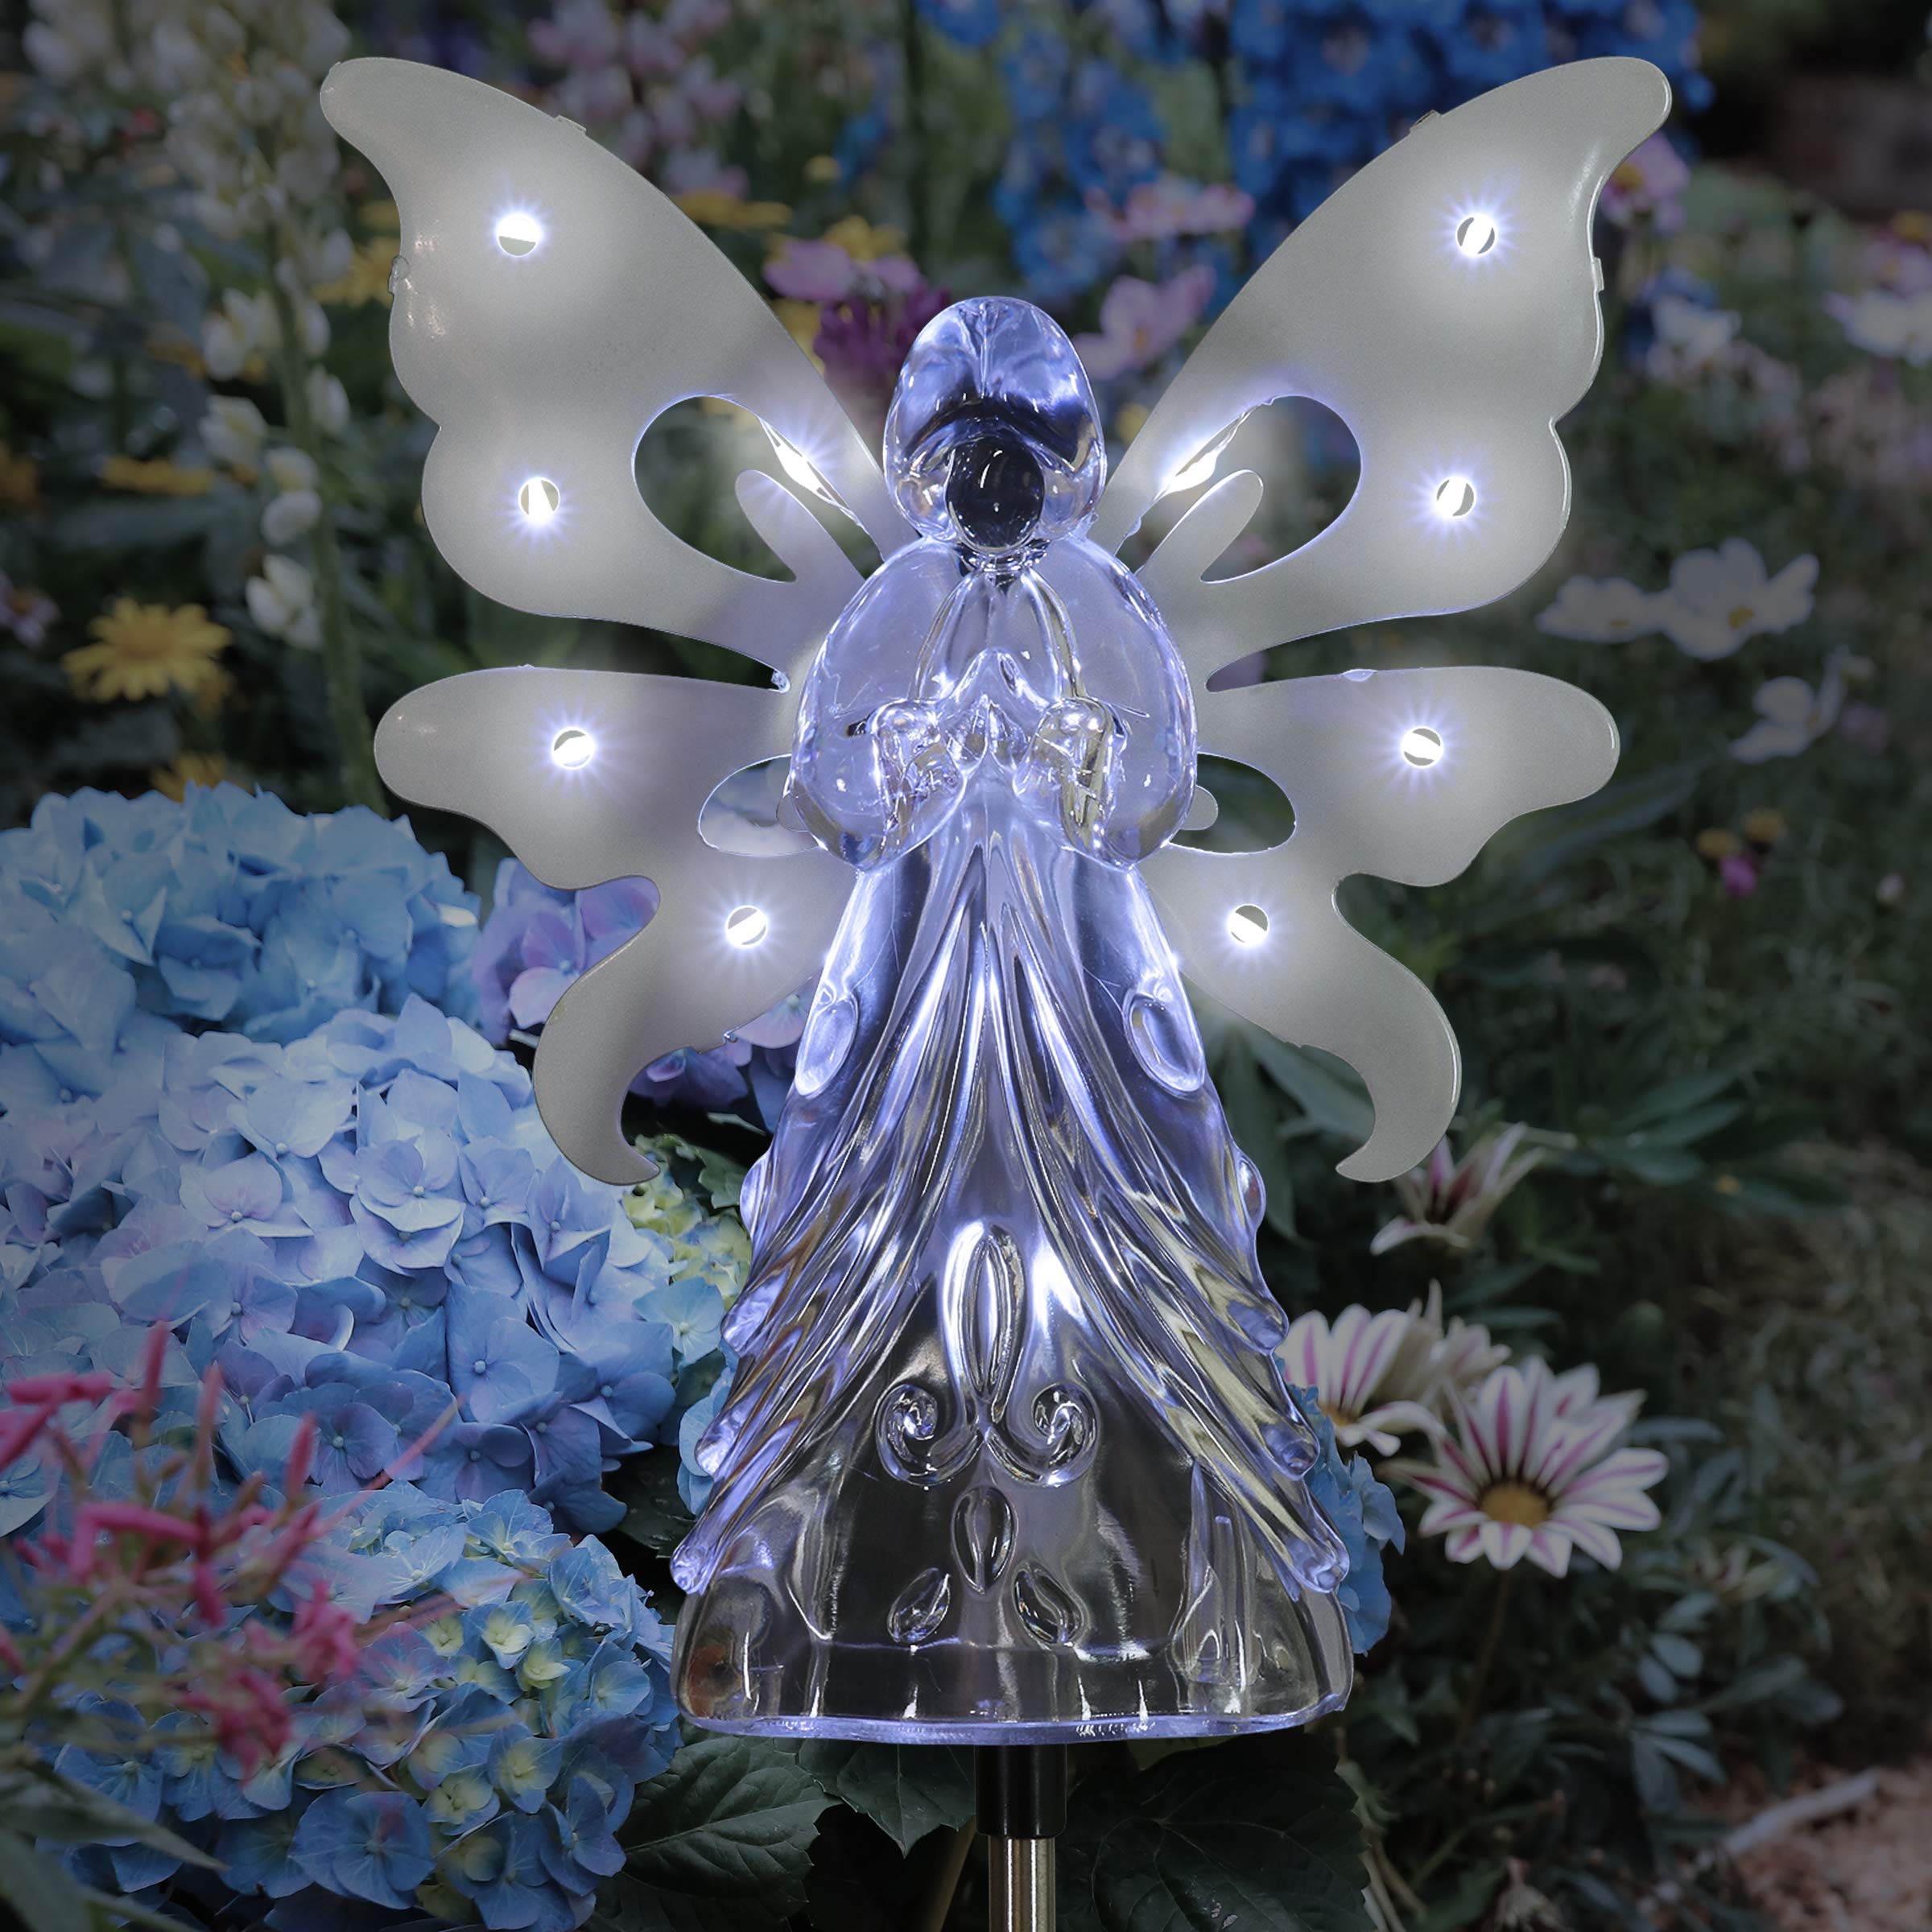 Exhart garden Solar Lights, Decorative Angel garden Stake, 13 LEDs, cute Yard and Pathway Decor, White, 7 x 40 Inch